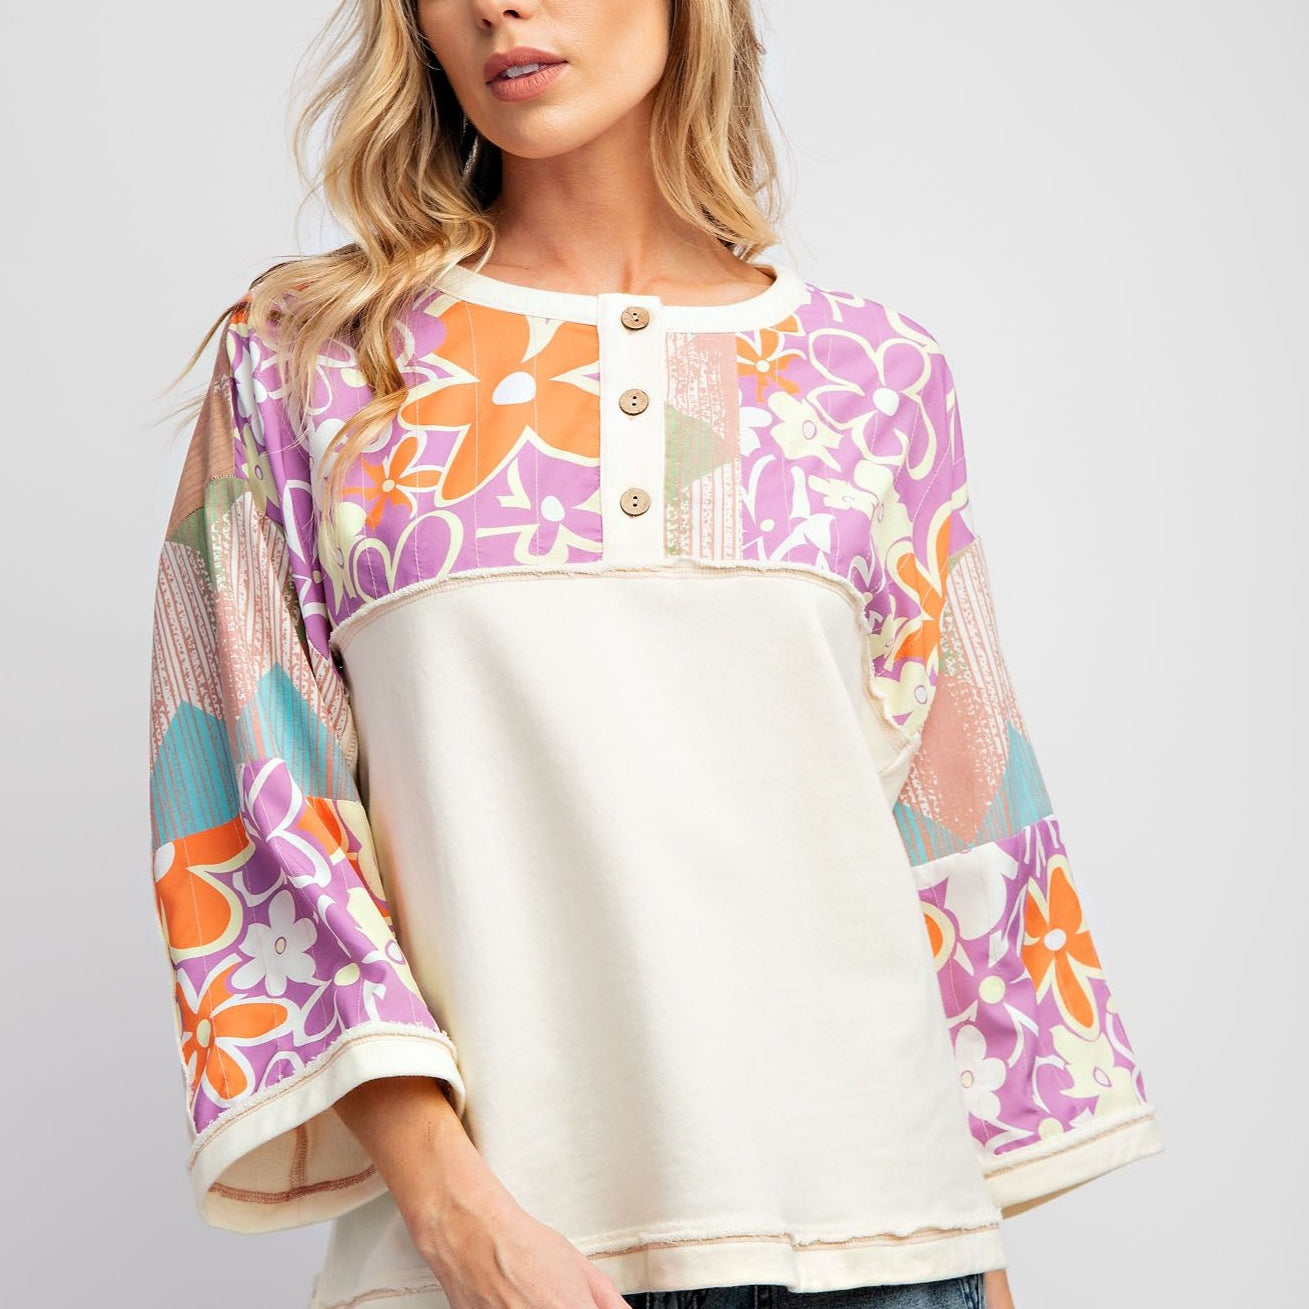 Flower Power Terry Knit Henley Top by Easel - Ivory - Regular-Apparel-Easel-LouisGeorge Boutique, Women’s Fashion Boutique Located in Trussville, Alabama